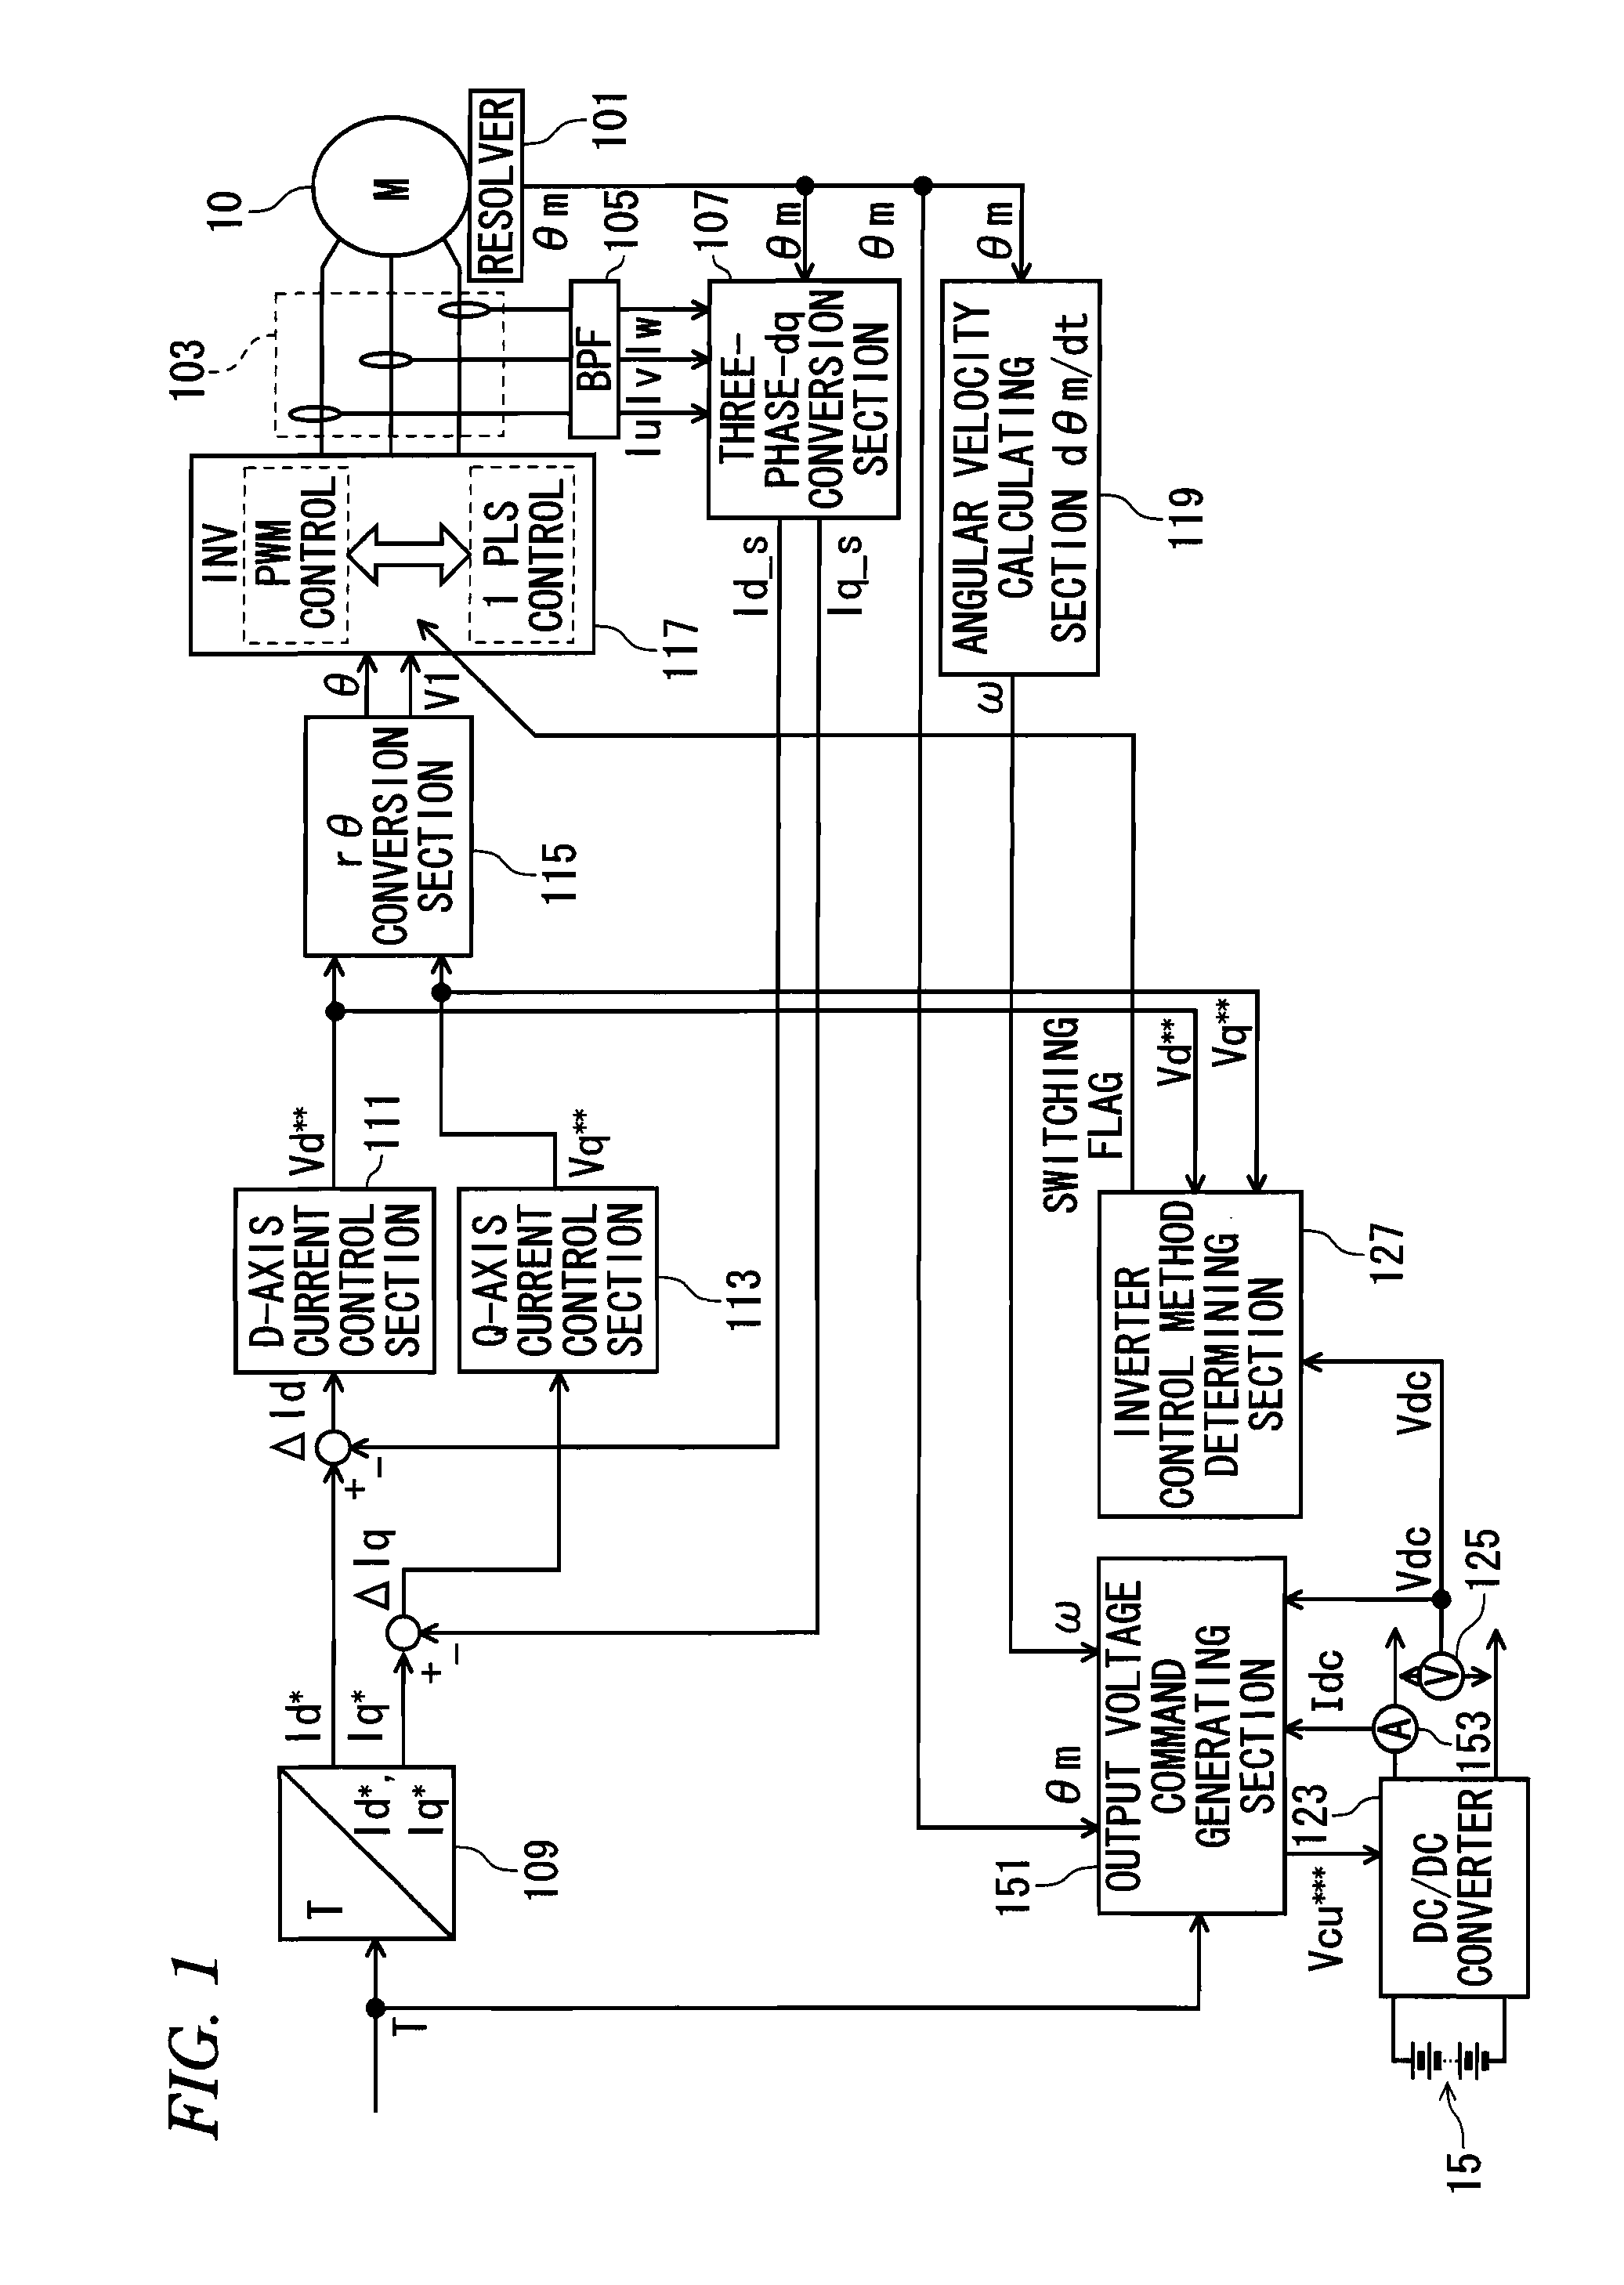 Control apparatus for electric motor